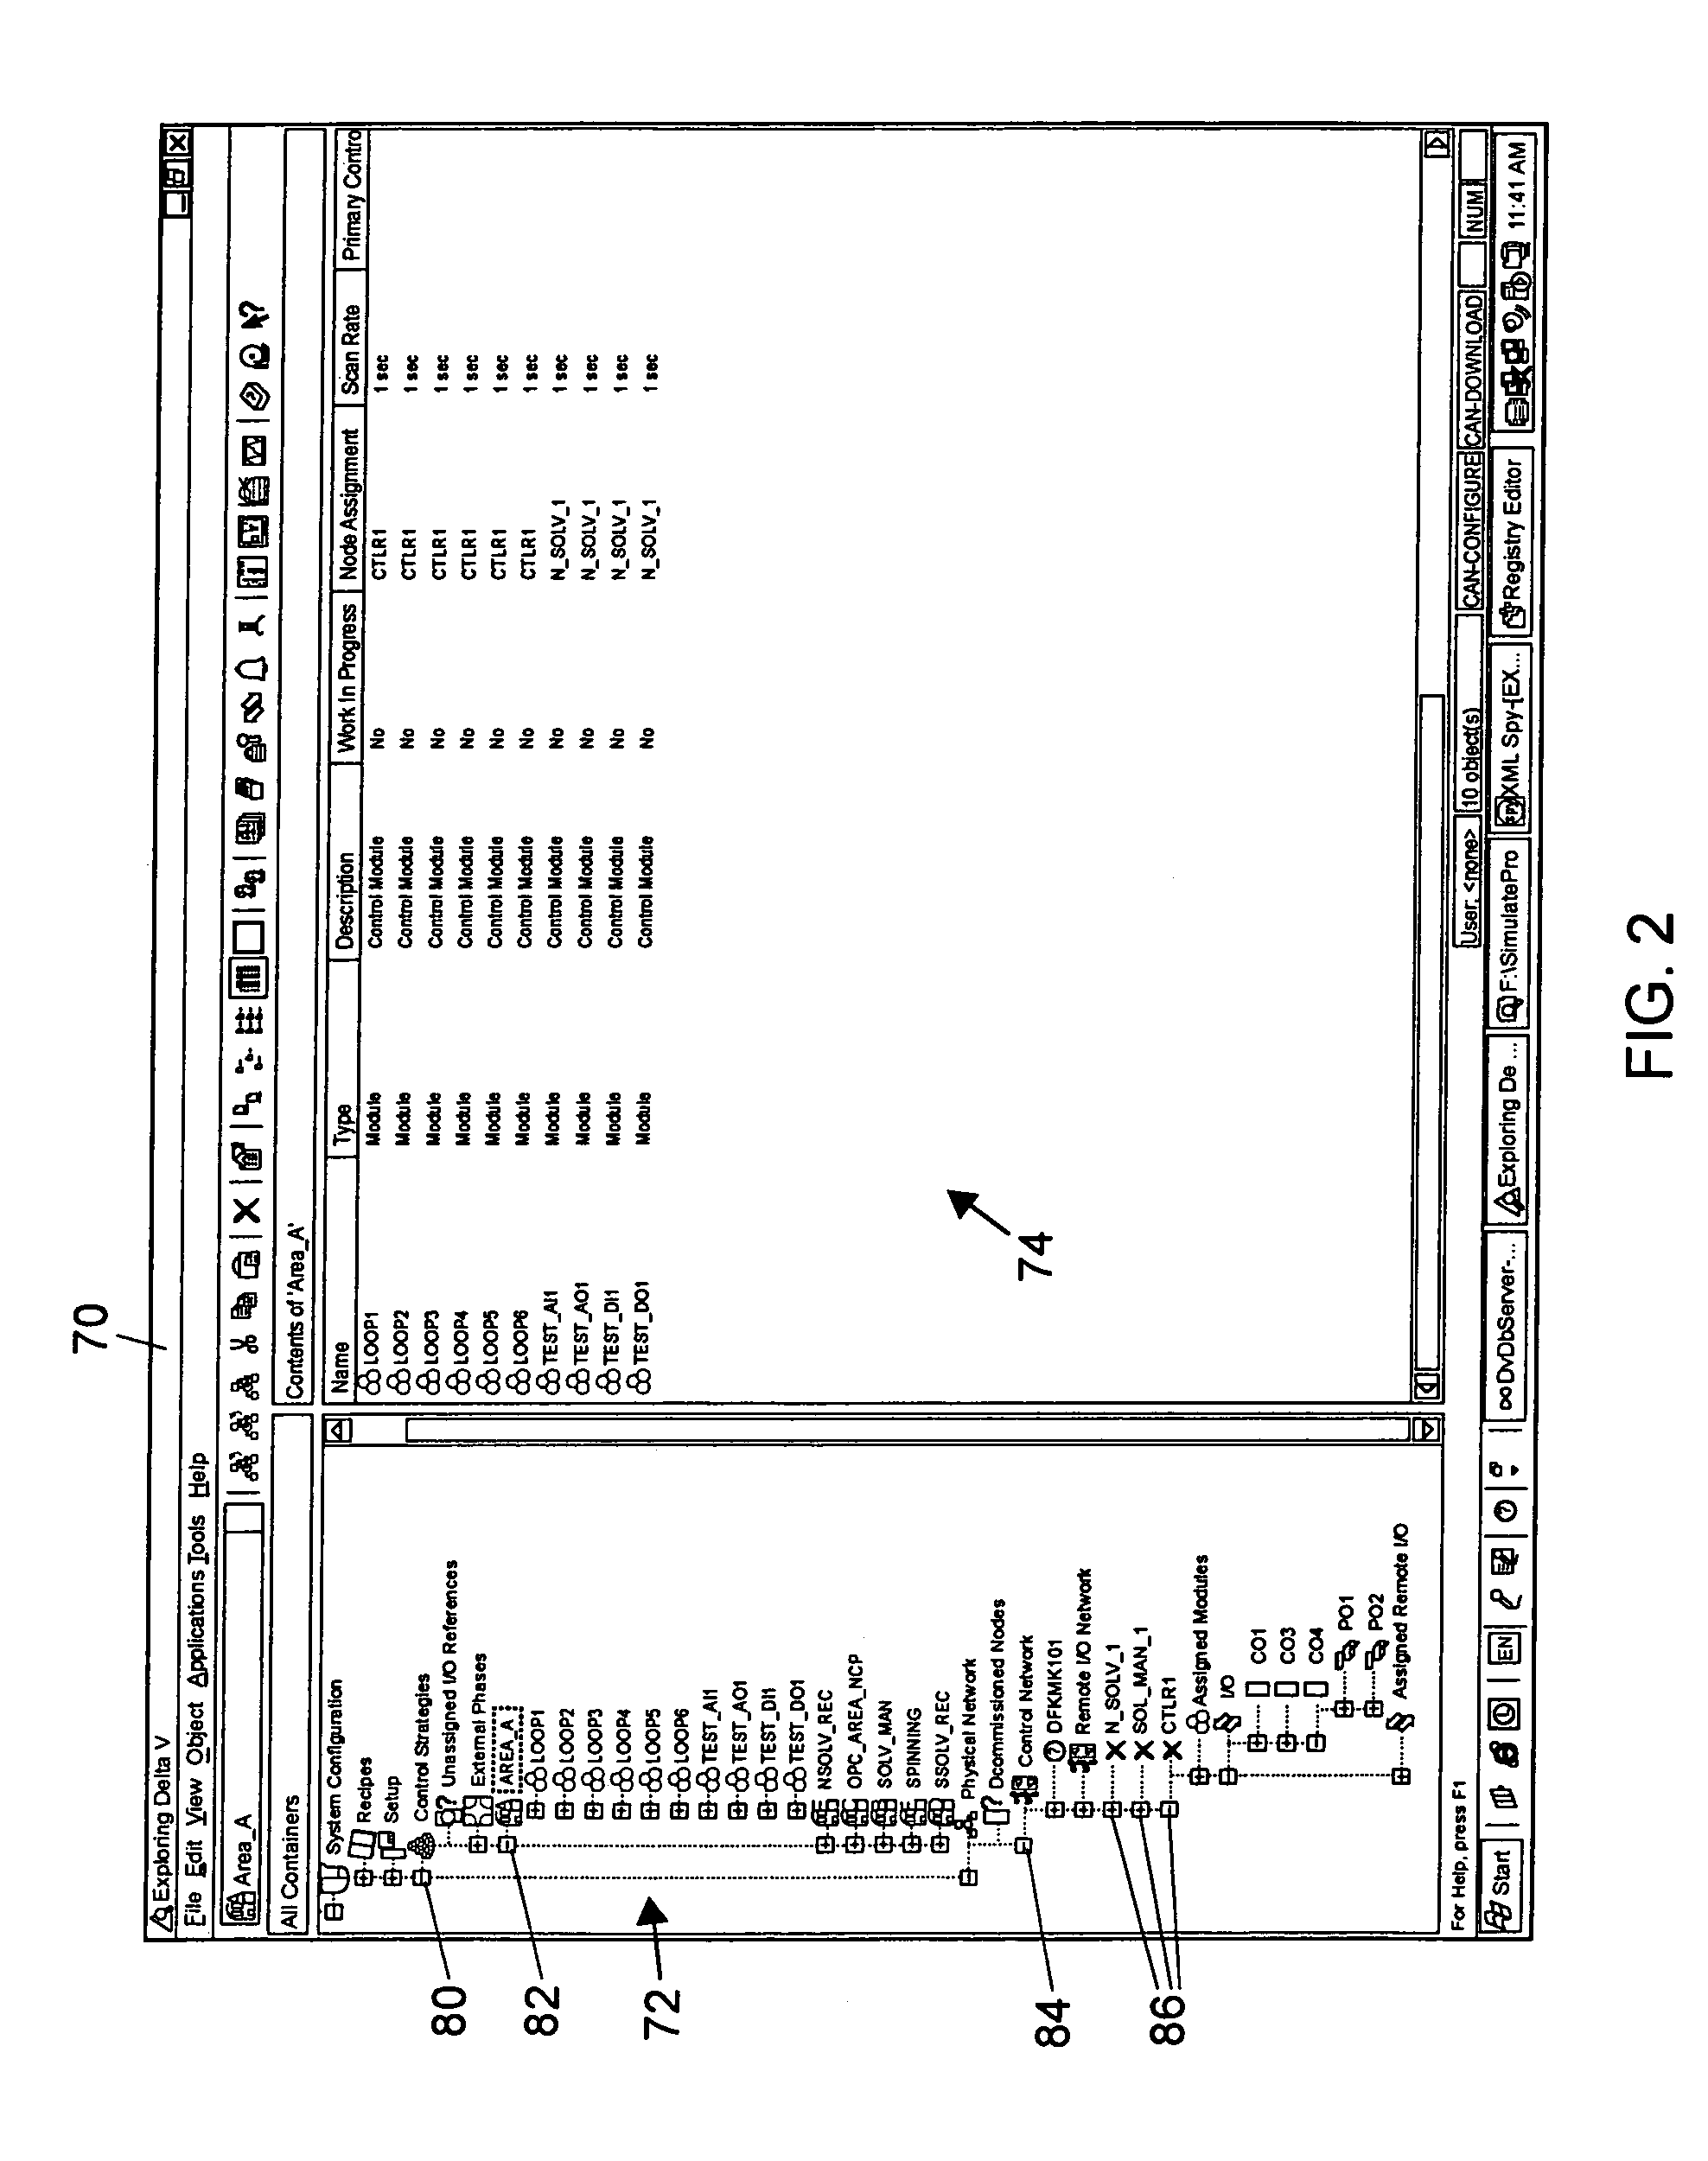 Simulation system for multi-node process control systems